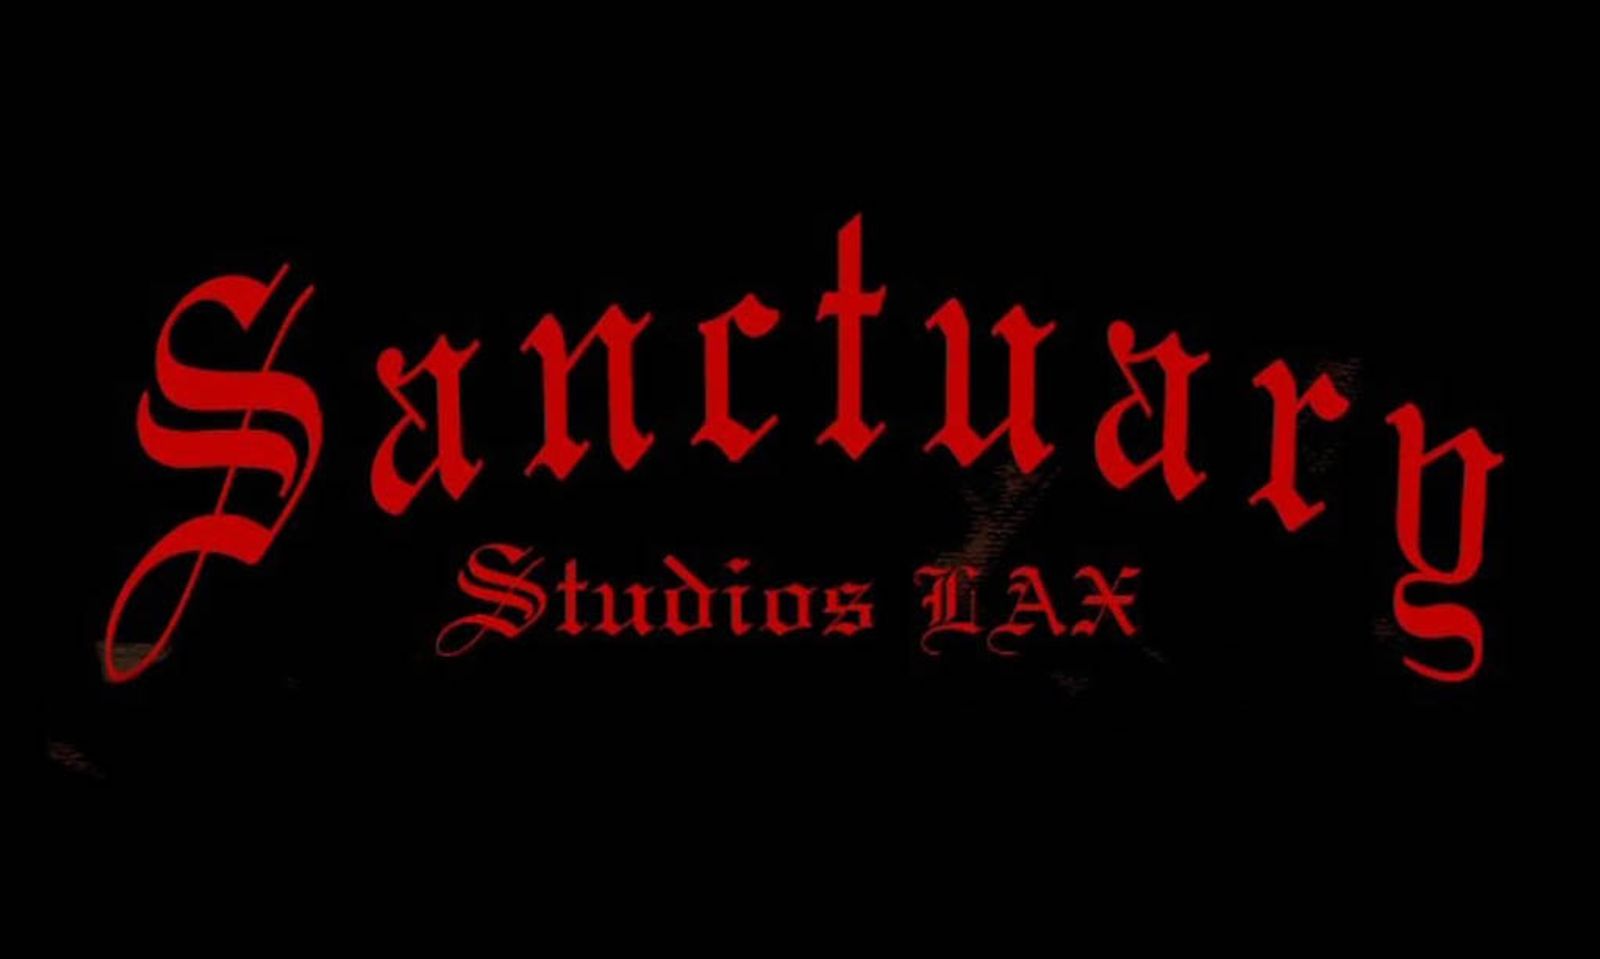 Sanctuary Studios LAX To Hold Marketplace & Charity Auction